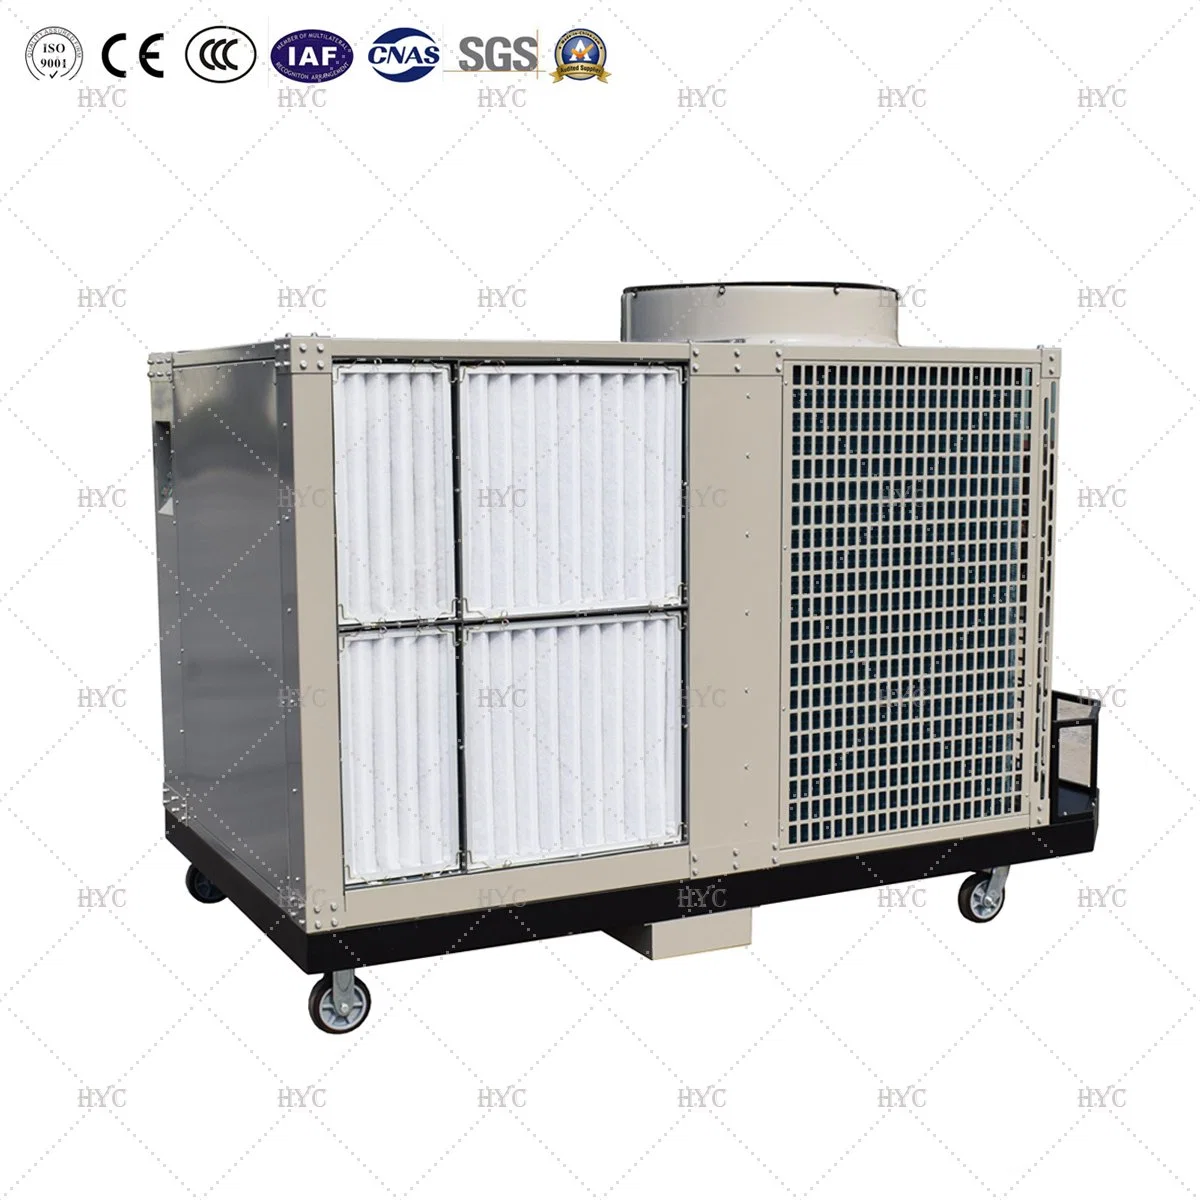 Portable Rooftop Packaged Unit Commericial DC Inverter Air Conditioner